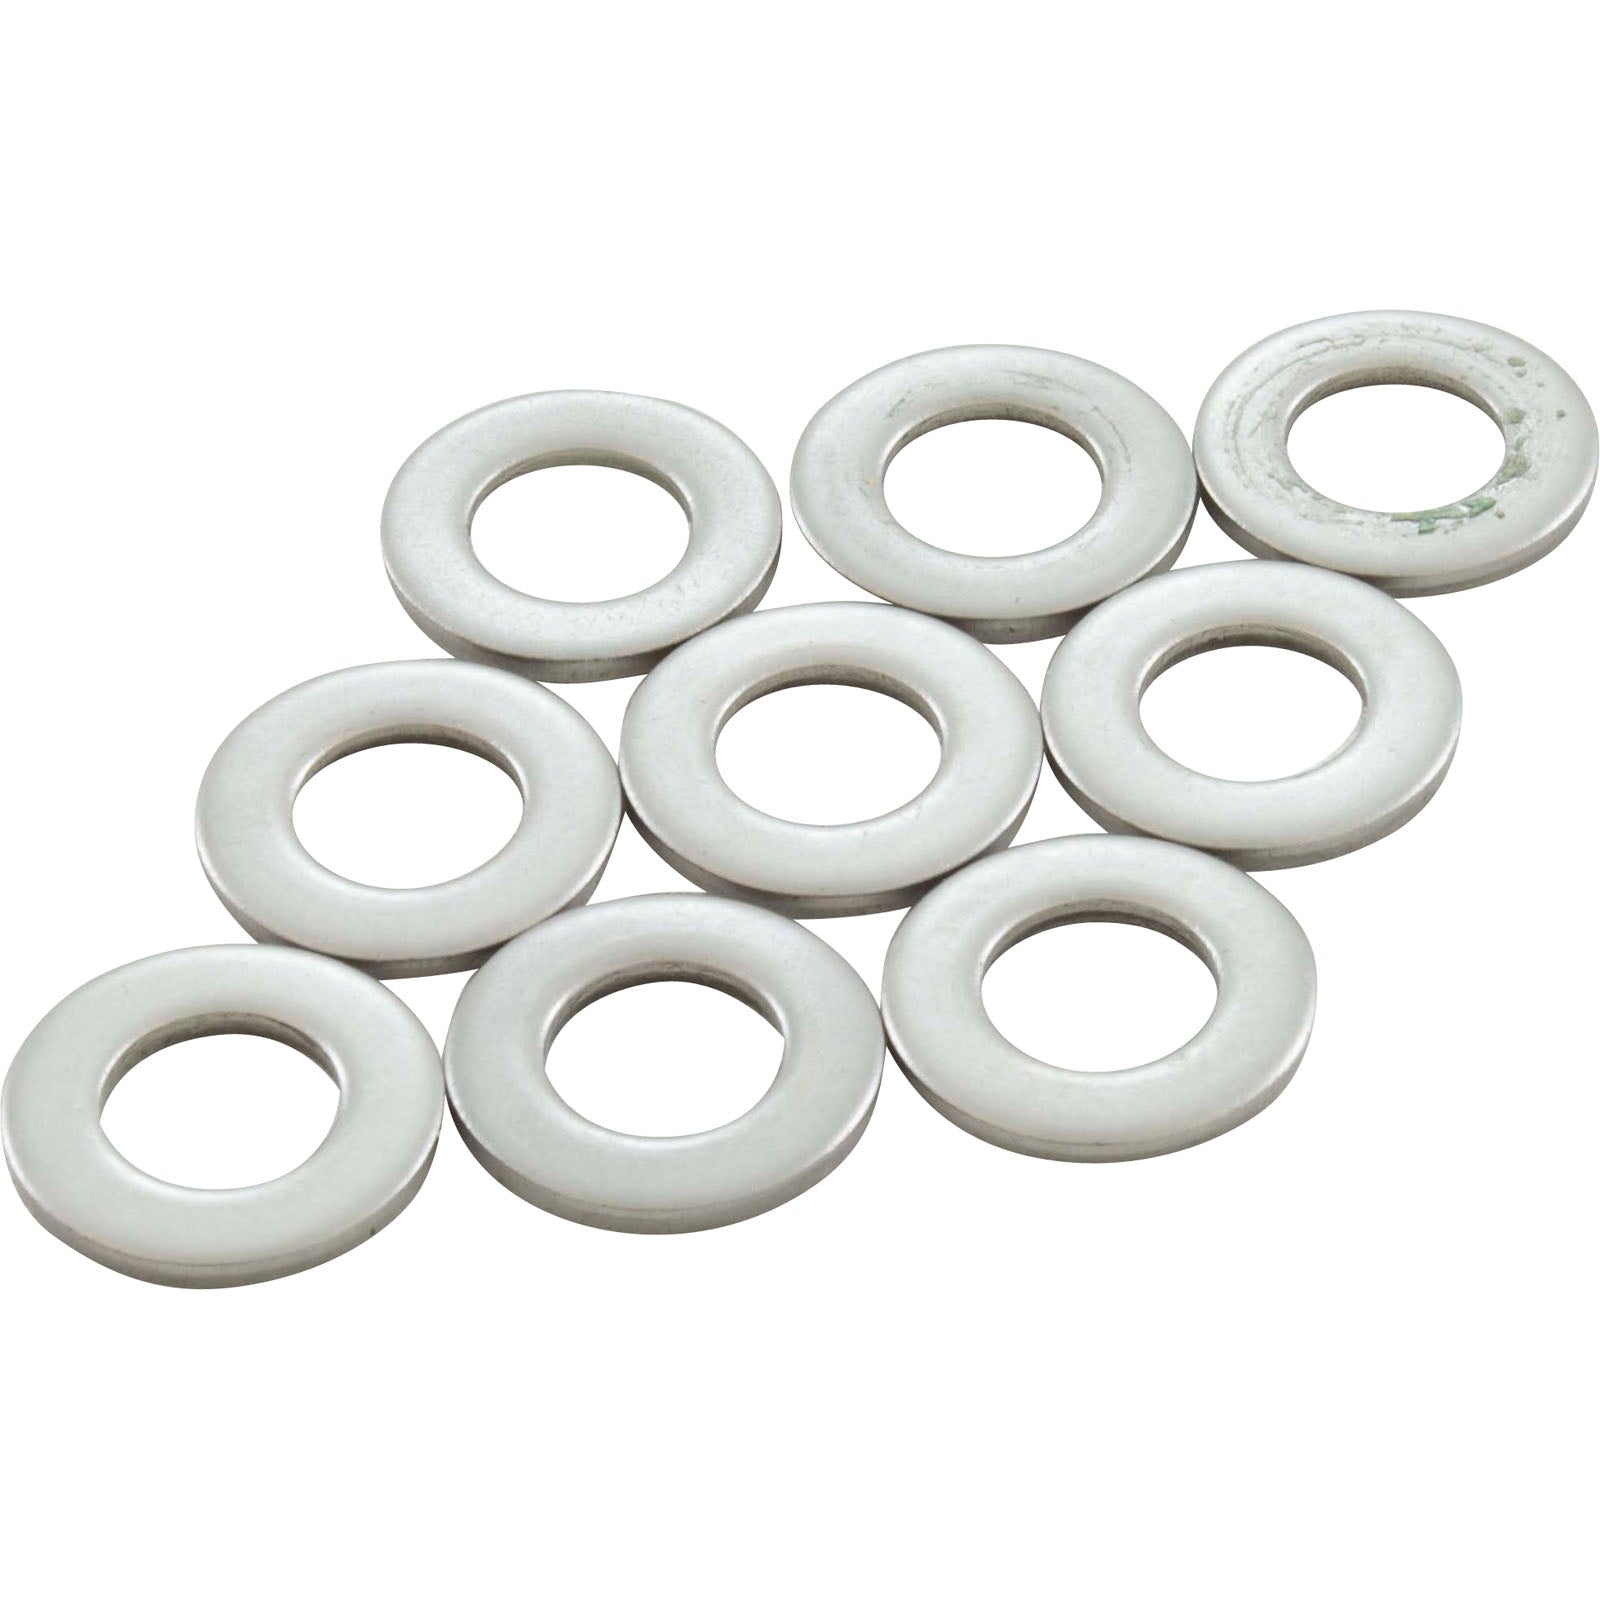 Washer, Speck 21-80 BS, Lid, M10, Quantity 9/ 2991000026